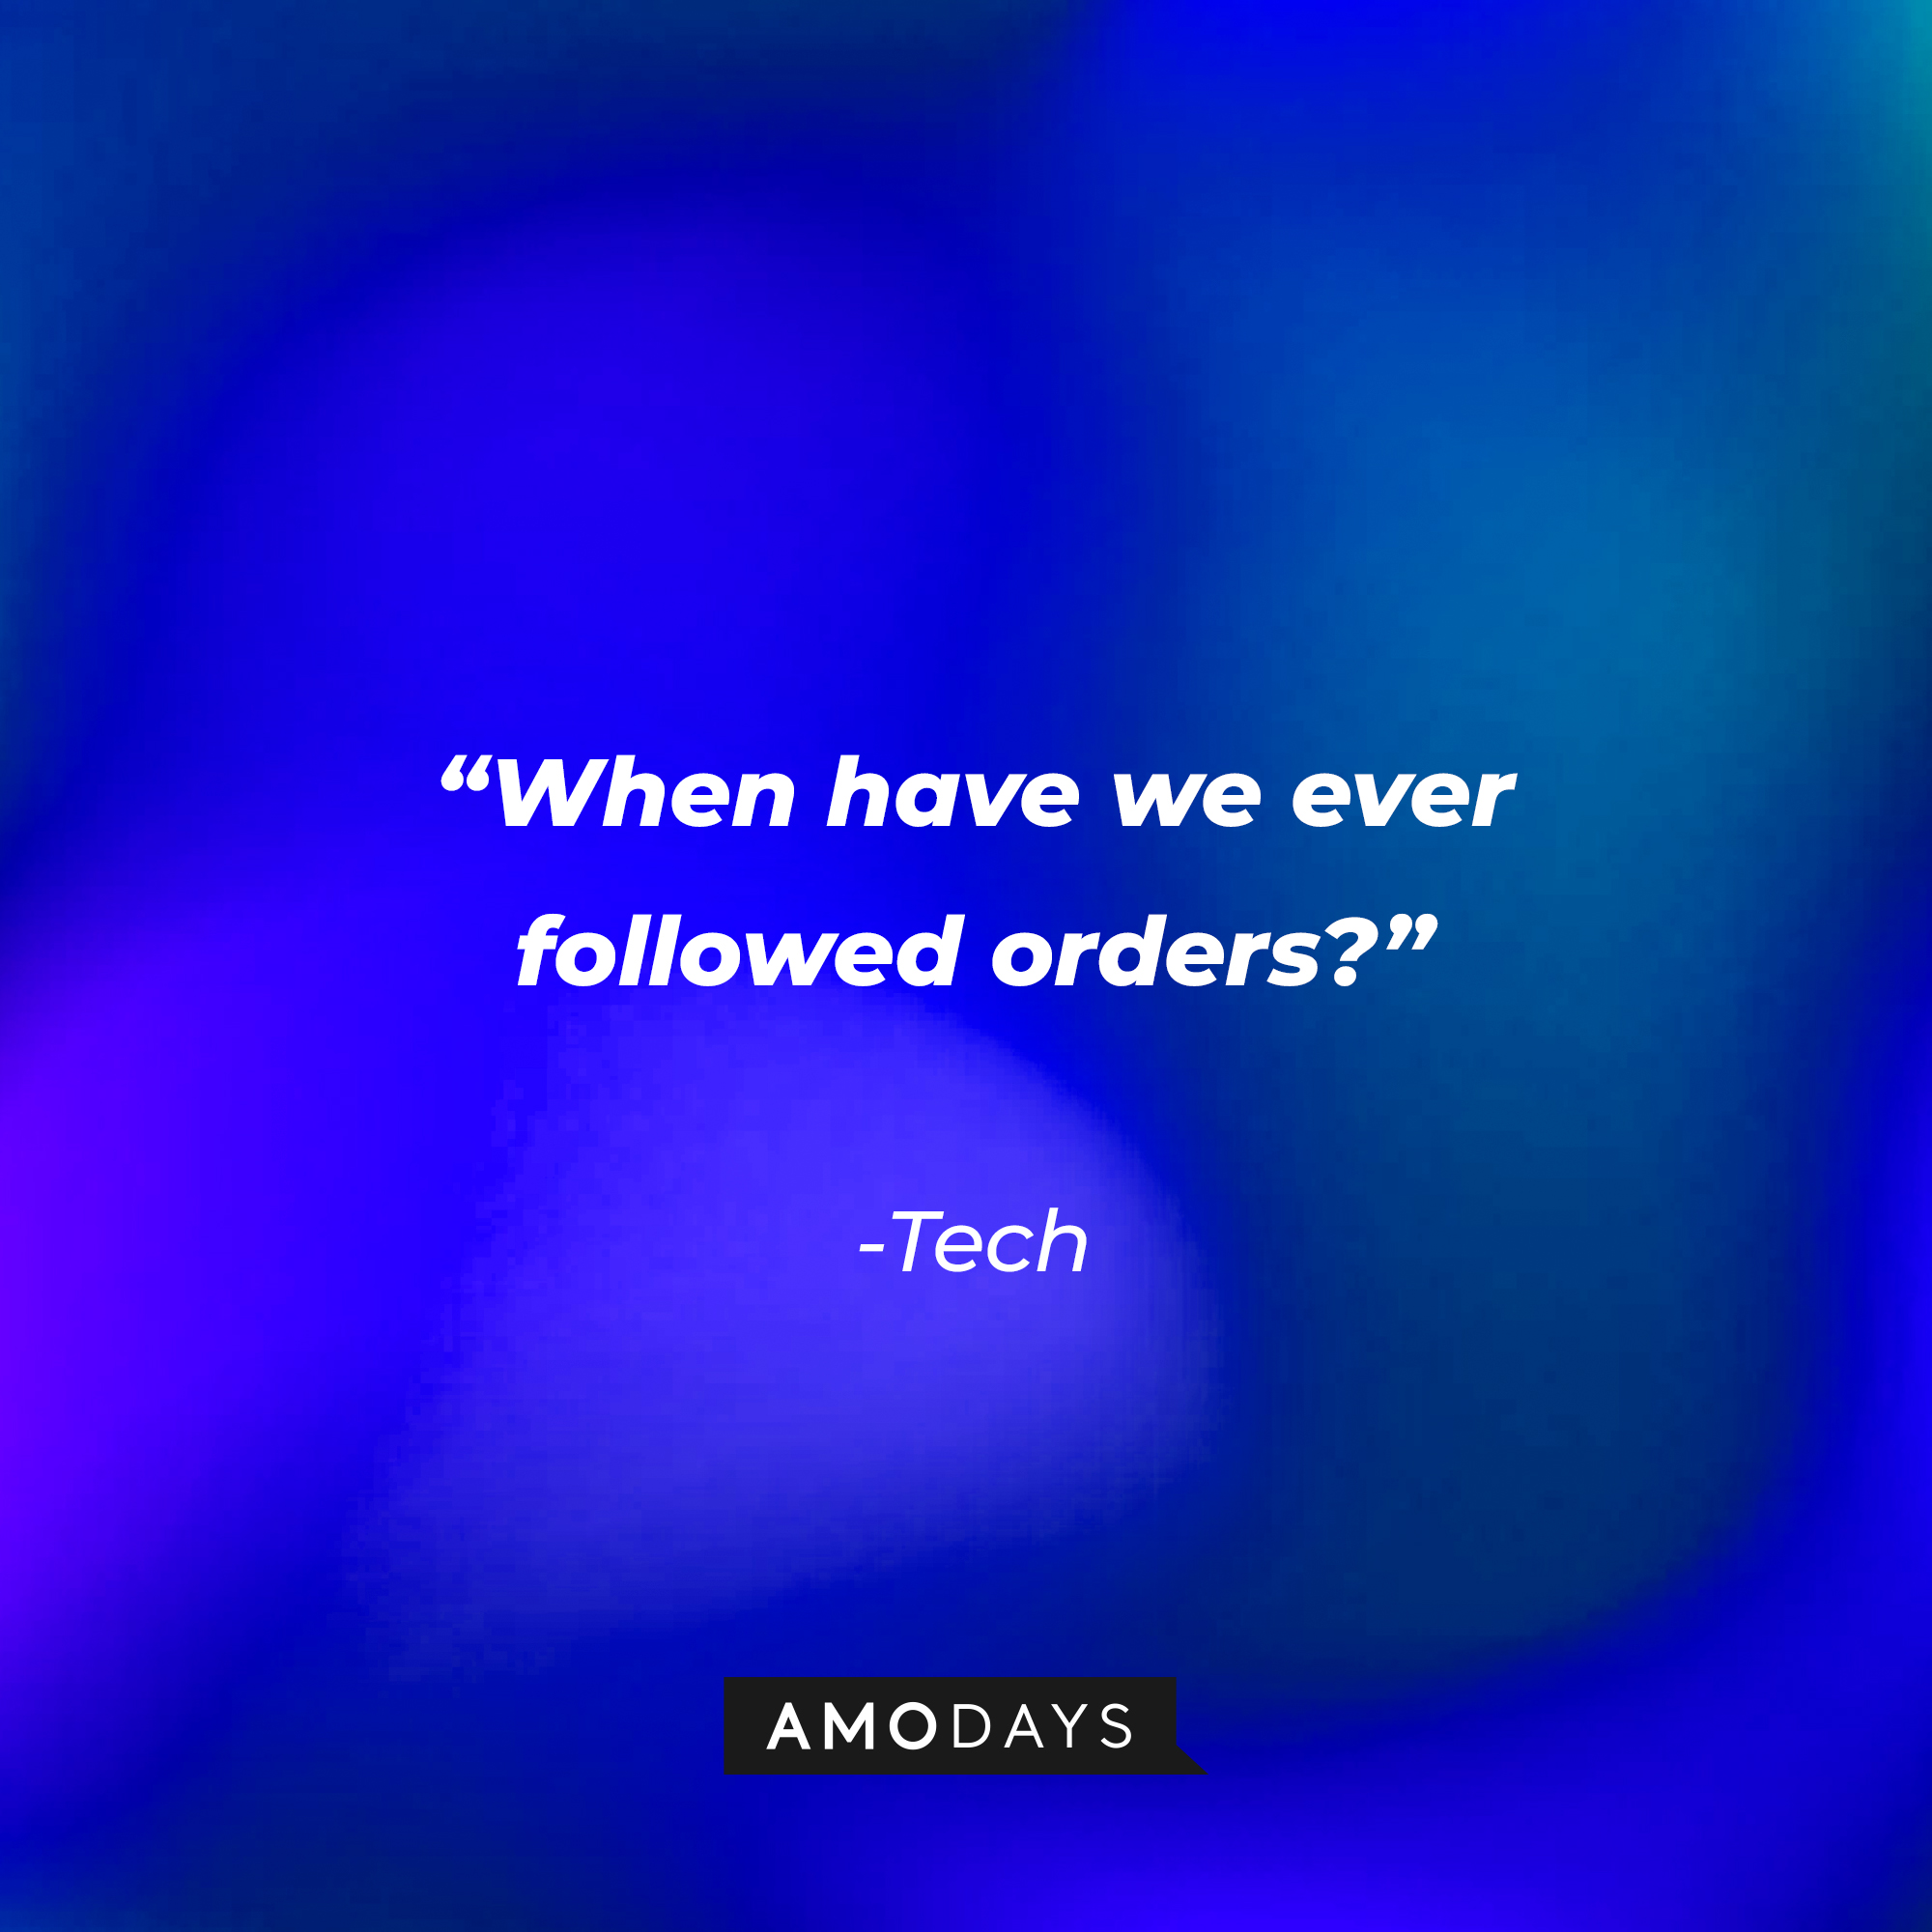 Tech’s quote: "When have we ever followed orders?" | Source: AmoDays